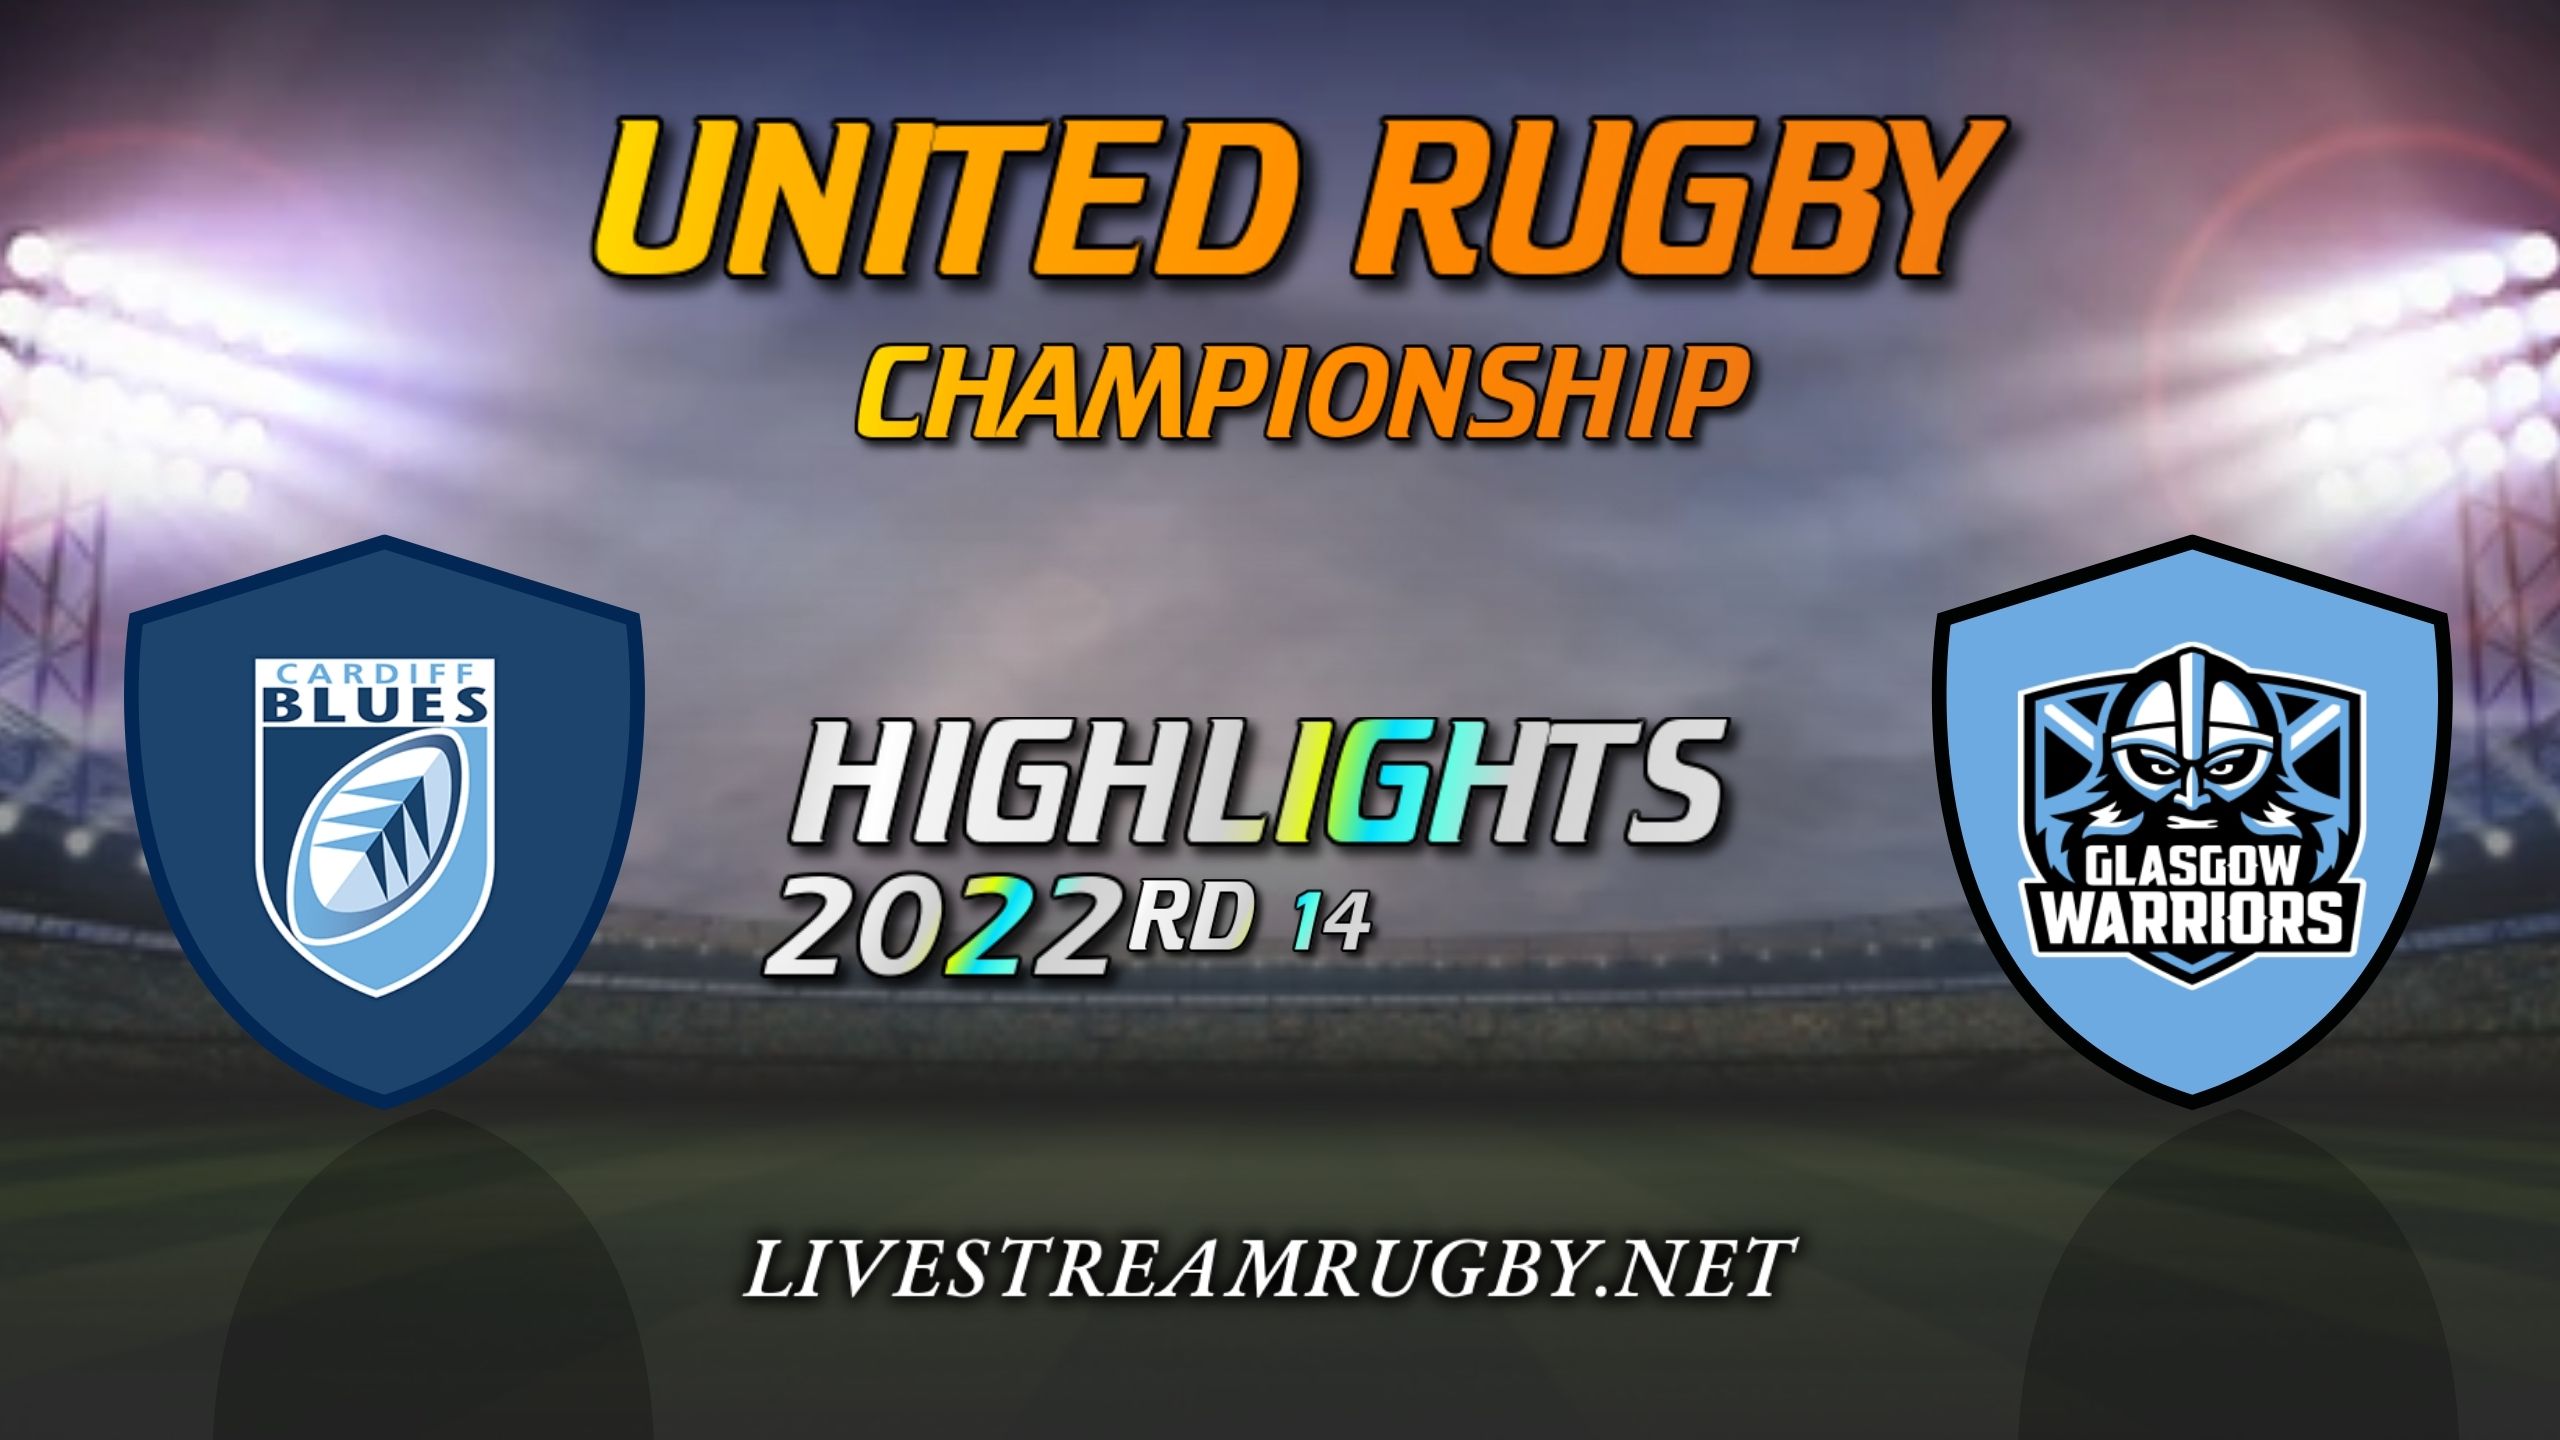 Cardiff Vs Warriors Highlights 2022 Rd 14 United Rugby